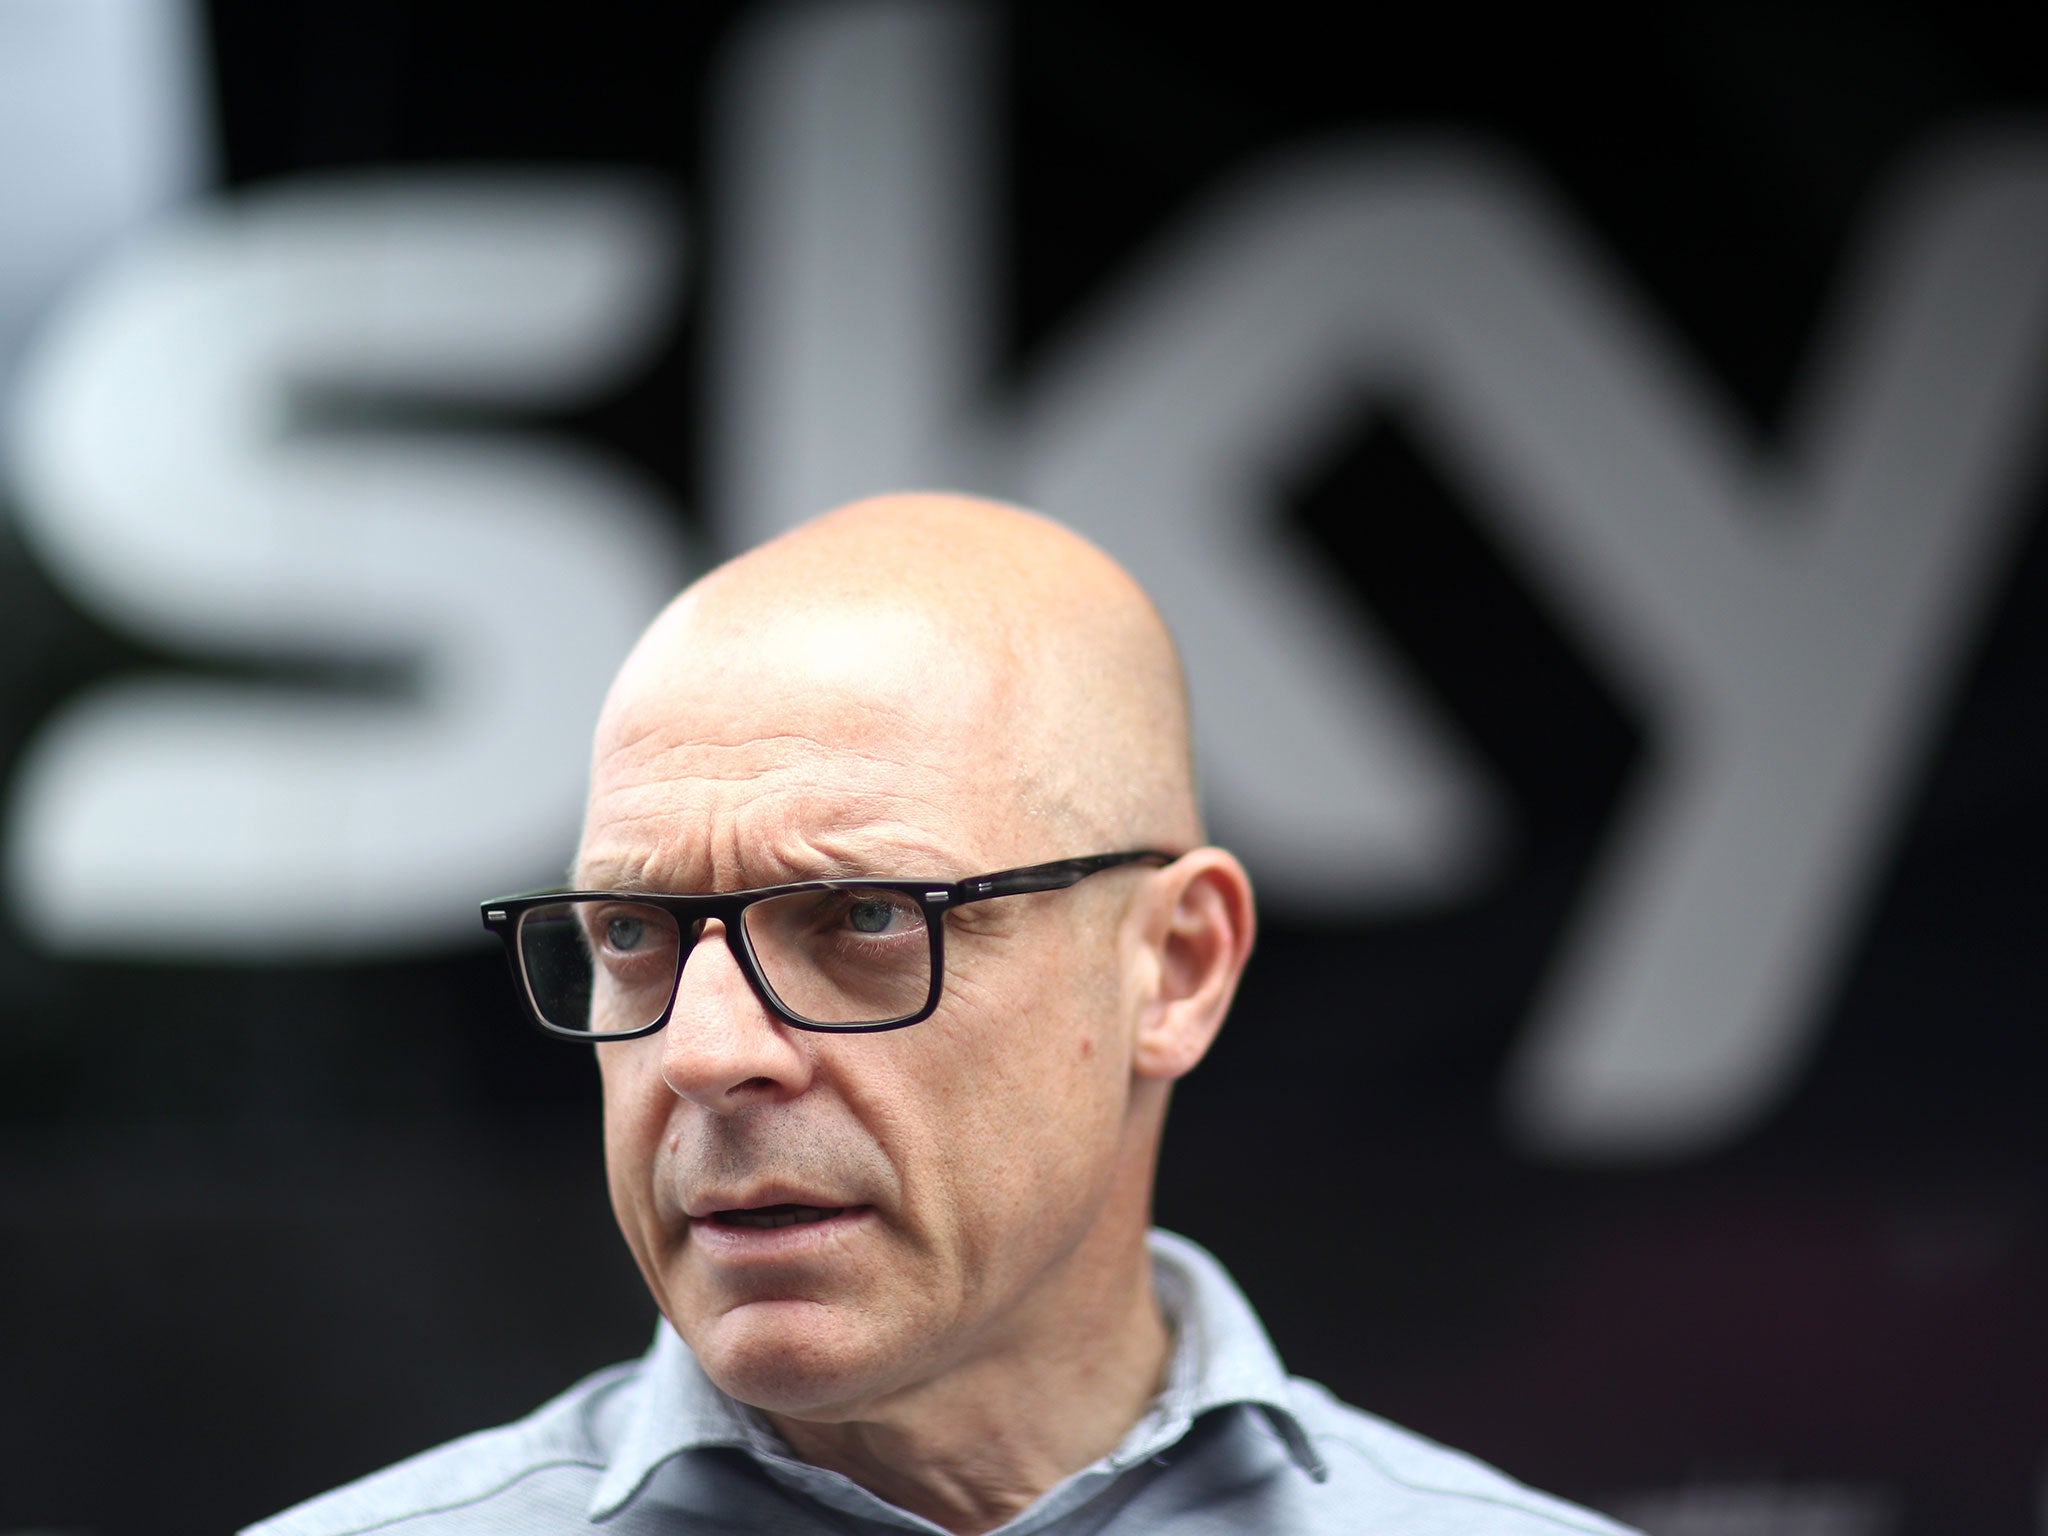 Dave Brailsford has been tainted by the controversy around Team Sky